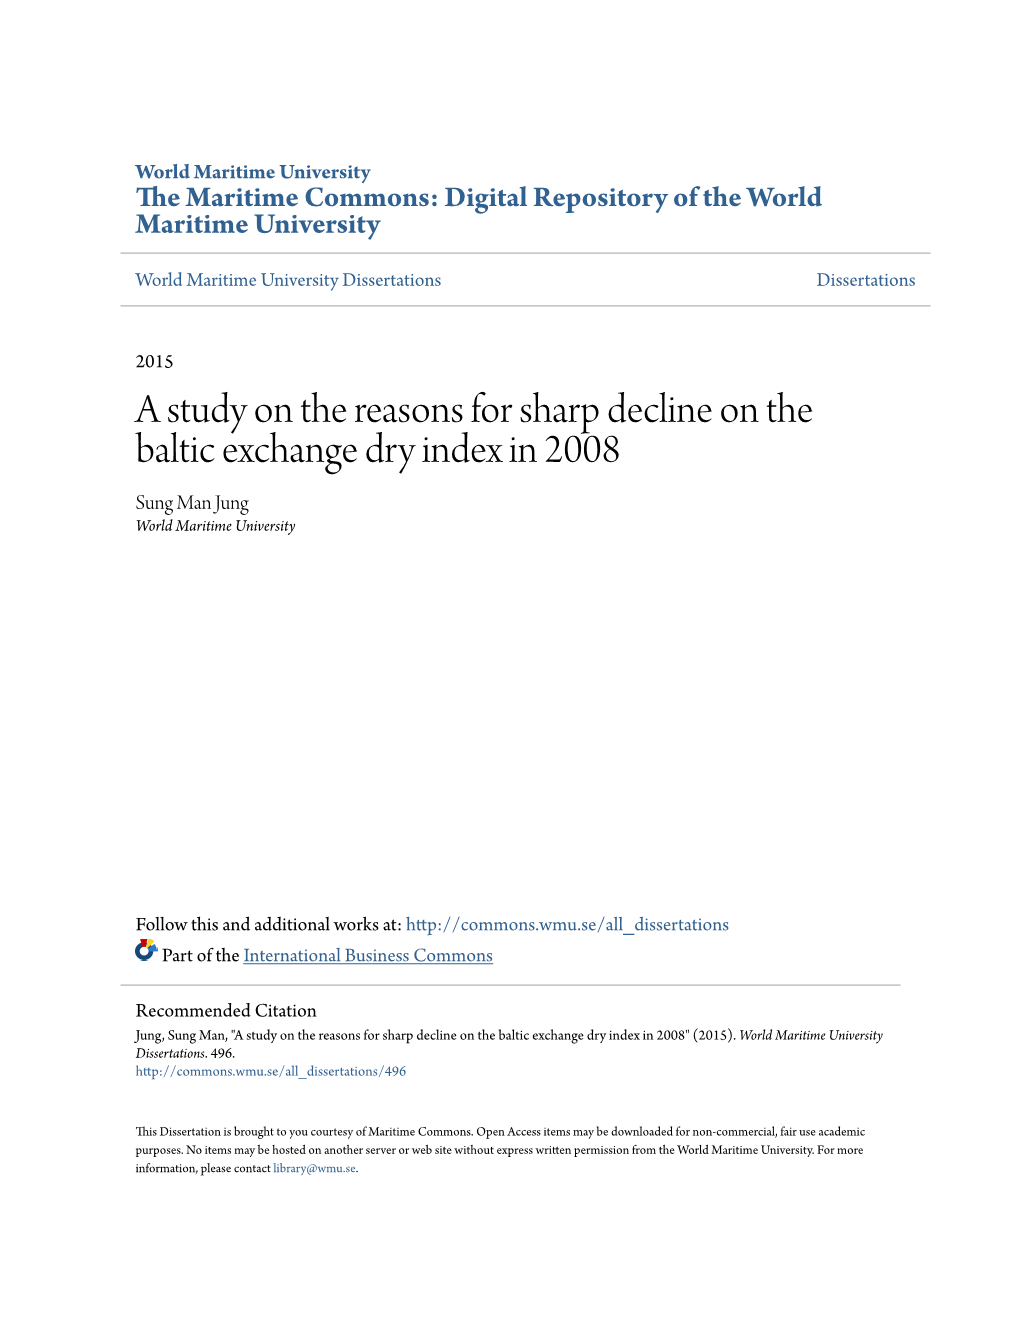 A Study on the Reasons for Sharp Decline on the Baltic Exchange Dry Index in 2008 Sung Man Jung World Maritime University